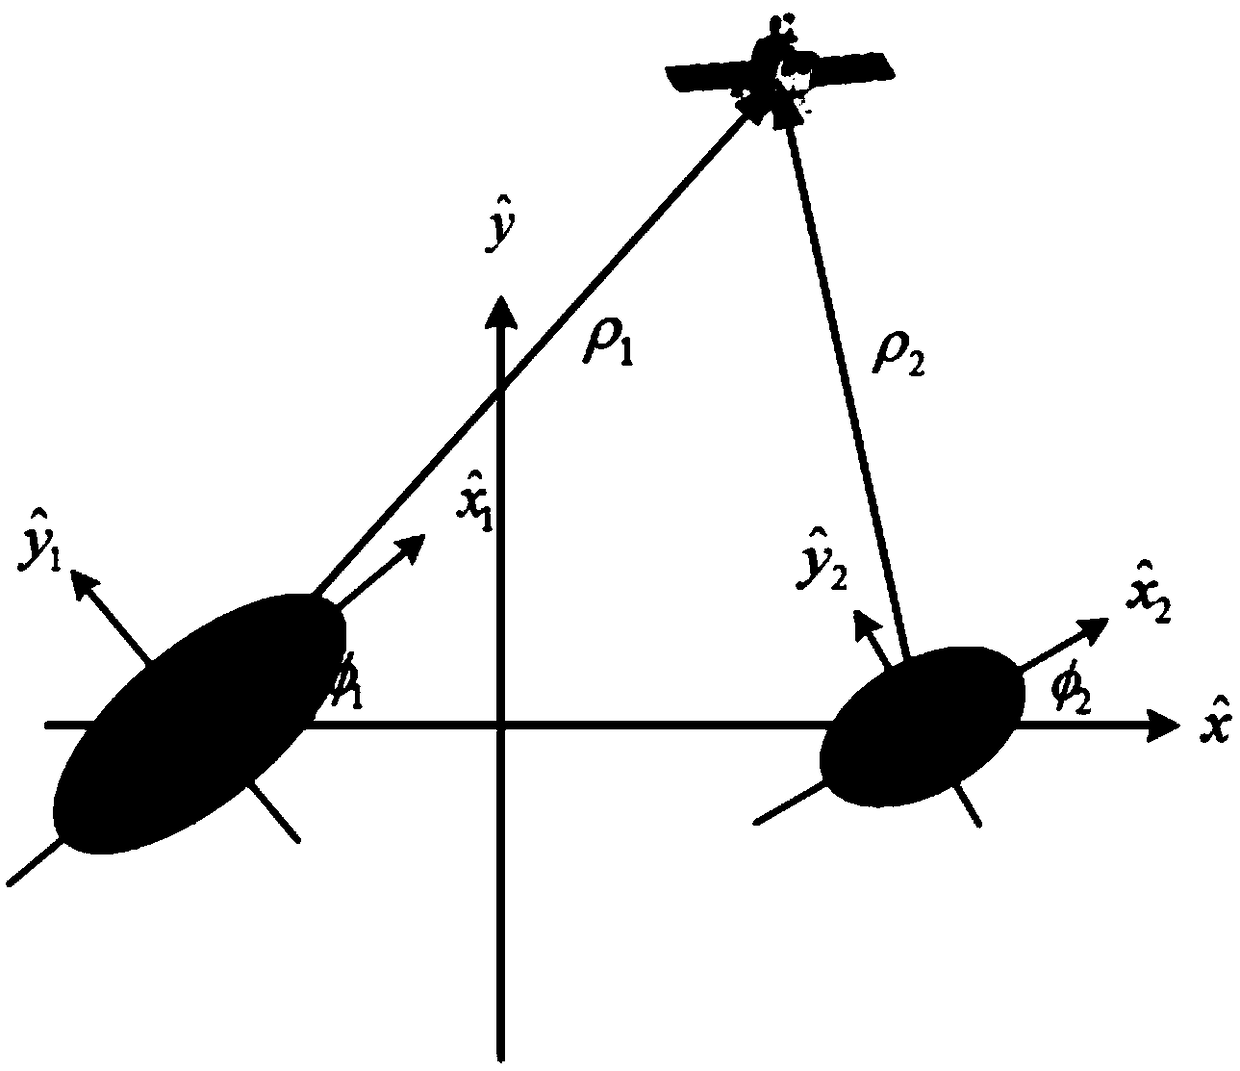 Calculation Method of Stable Orbit for Nonsynchronous Binary Star System